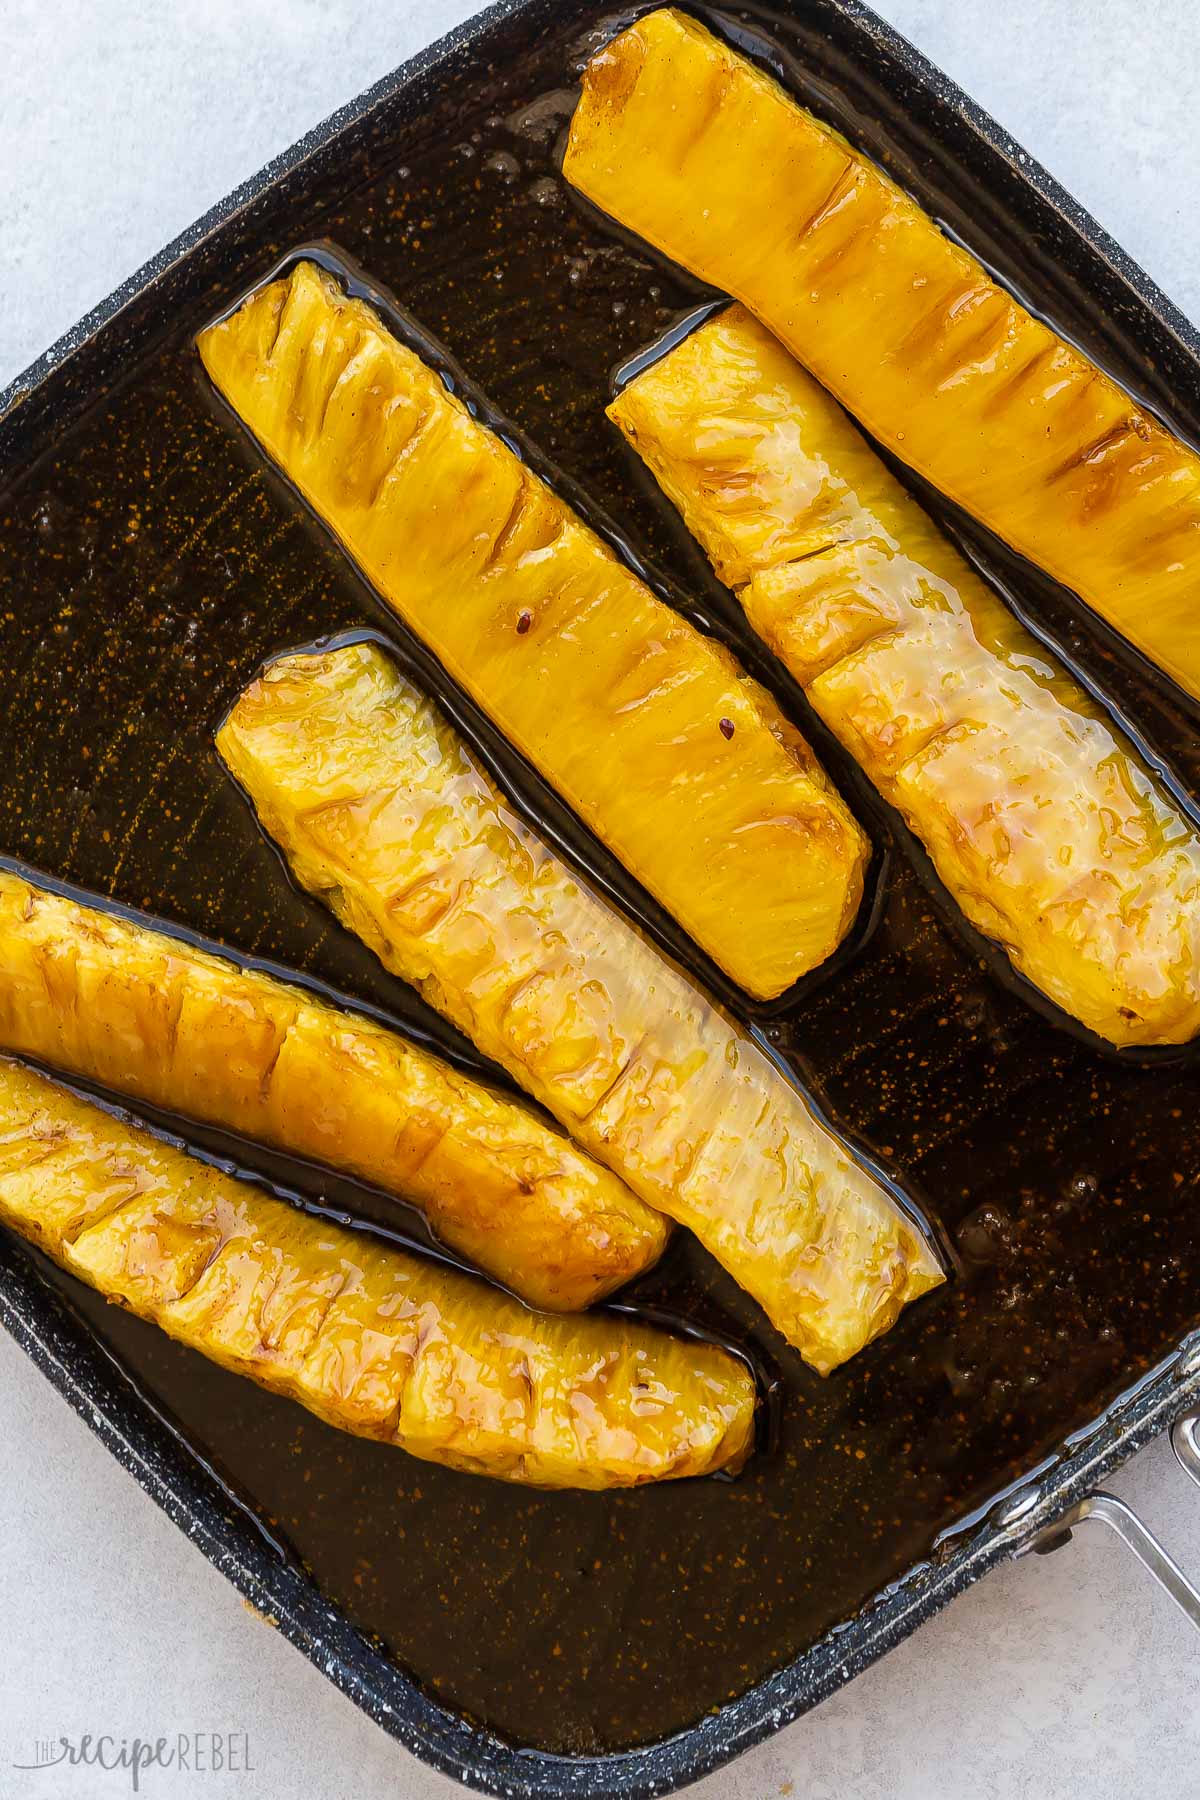 six pineapple spears on black grill pan.